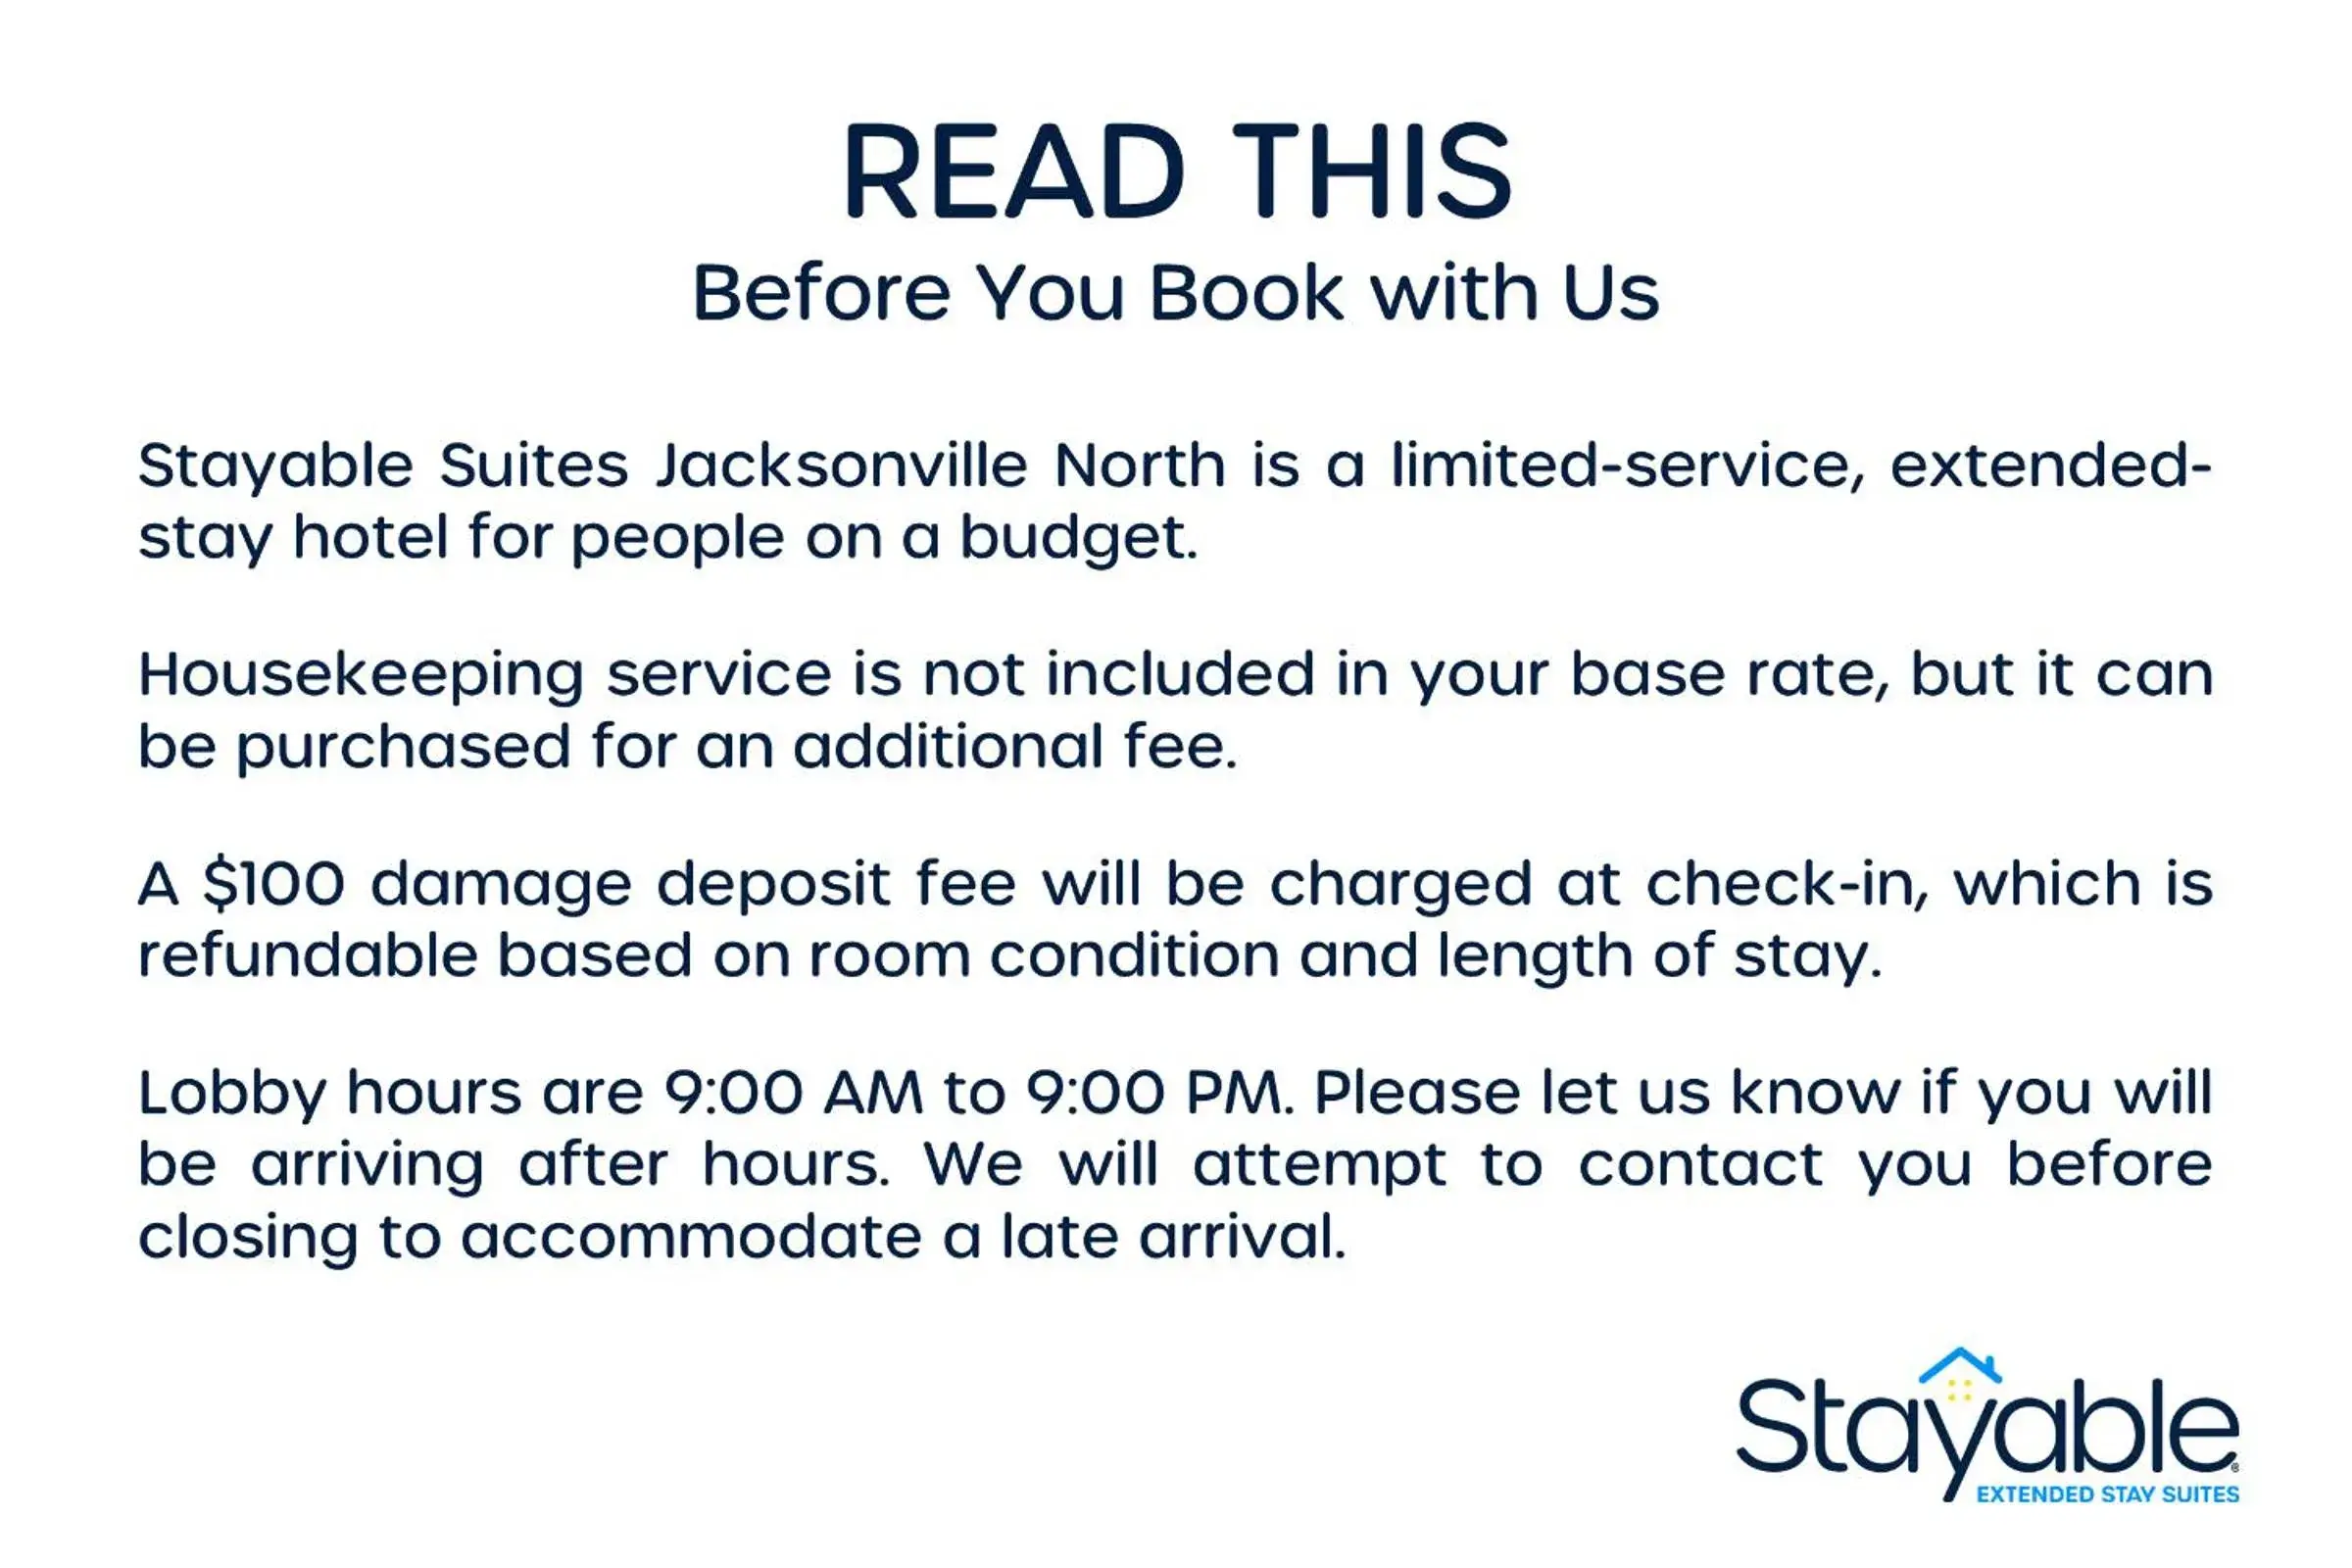 Text overlay in Stayable Suites Jacksonville North